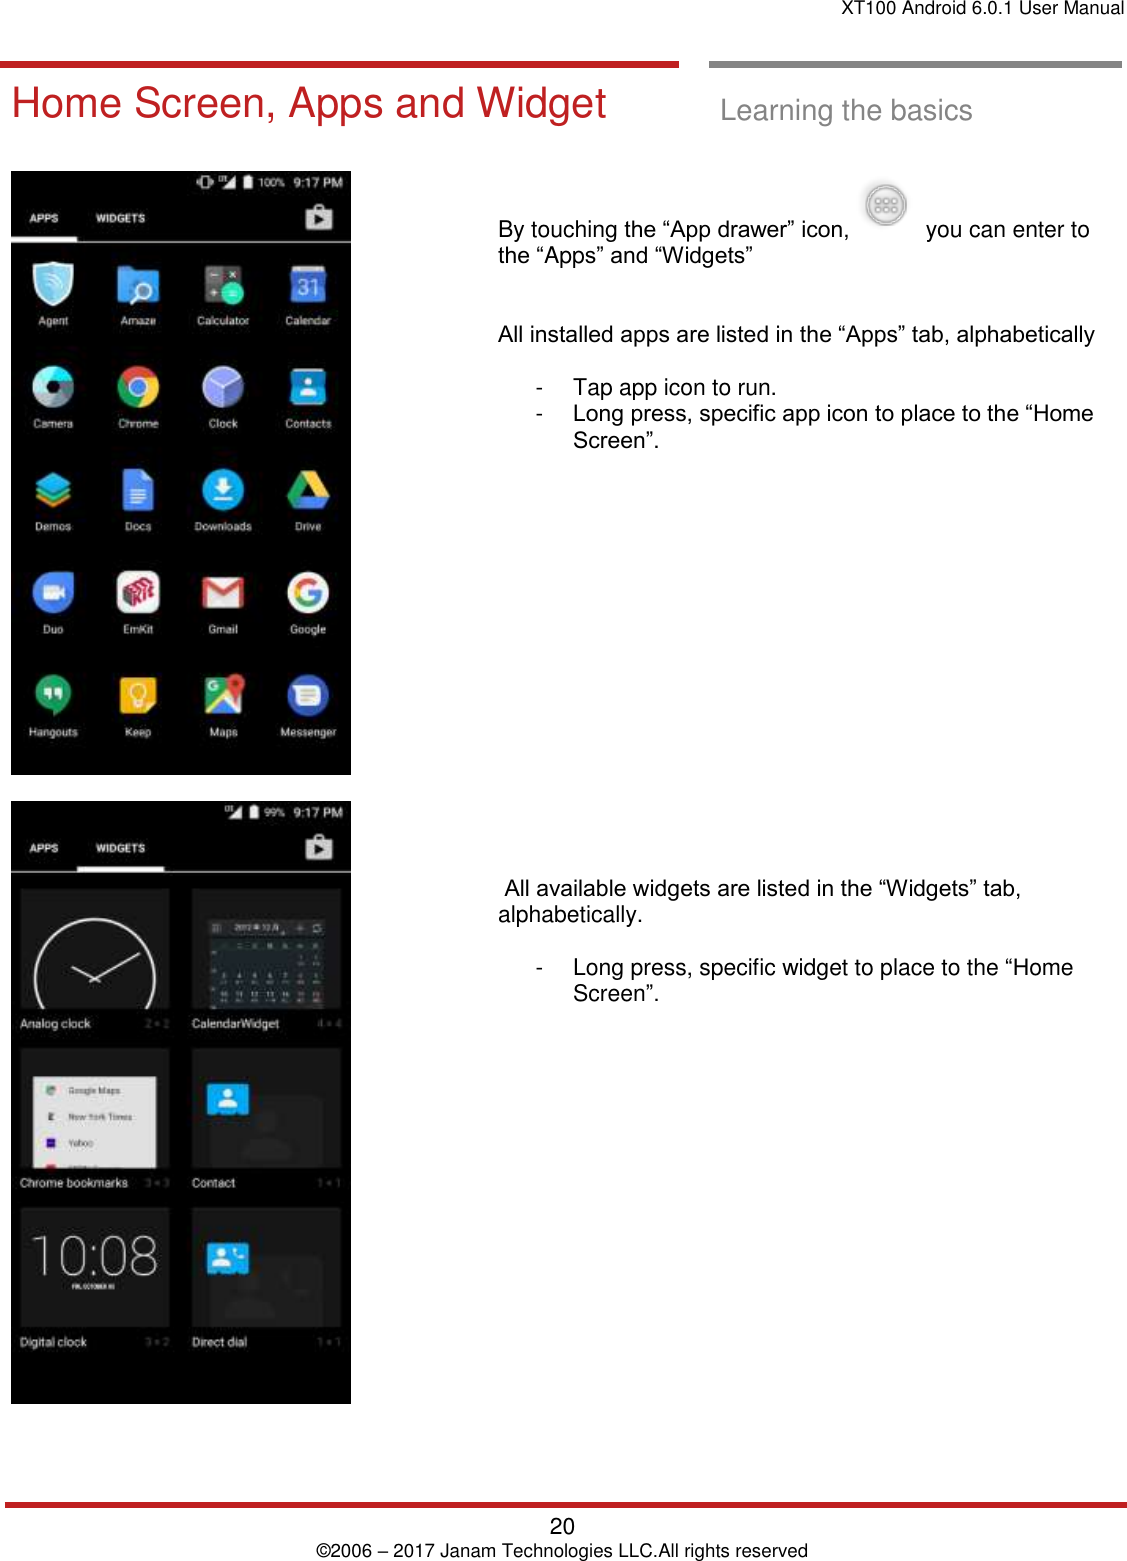 XT100 Android 6.0.1 User Manual   20 © 2006 – 2017 Janam Technologies LLC.All rights reserved  Learning the basics  Home Screen, Apps and Widget  Learning the basics      By touching the “App drawer” icon,     you can enter to the “Apps” and “Widgets”    All installed apps are listed in the “Apps” tab, alphabetically   -  Tap app icon to run.  -  Long press, specific app icon to place to the “Home Screen”.                   All available widgets are listed in the “Widgets” tab, alphabetically.   -  Long press, specific widget to place to the “Home Screen”.  